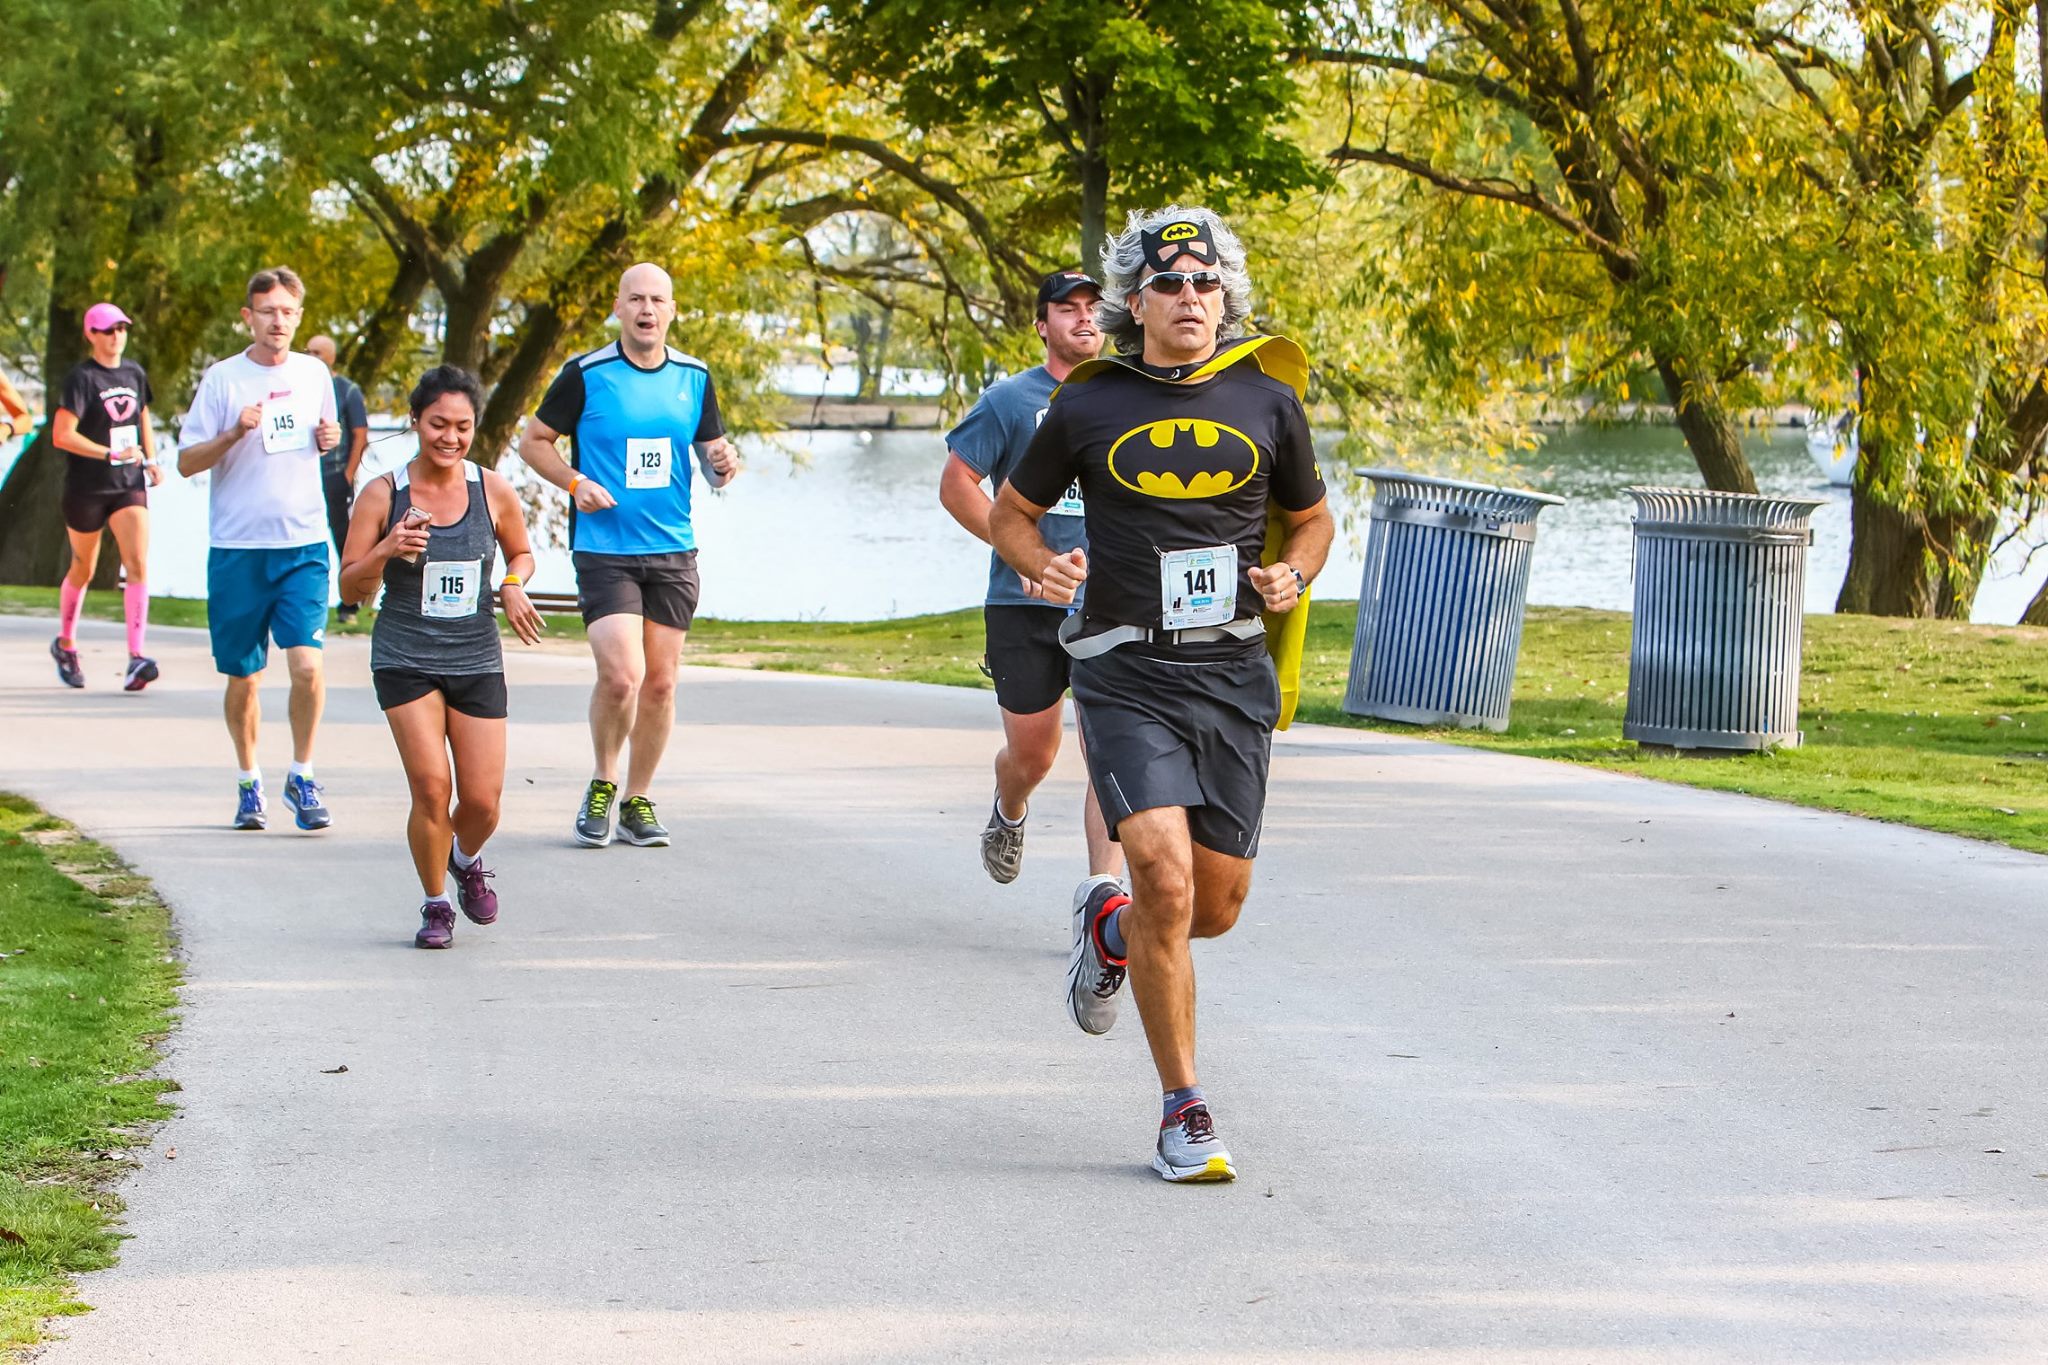 Peter running in a Batman costume. There are other runners behind him.